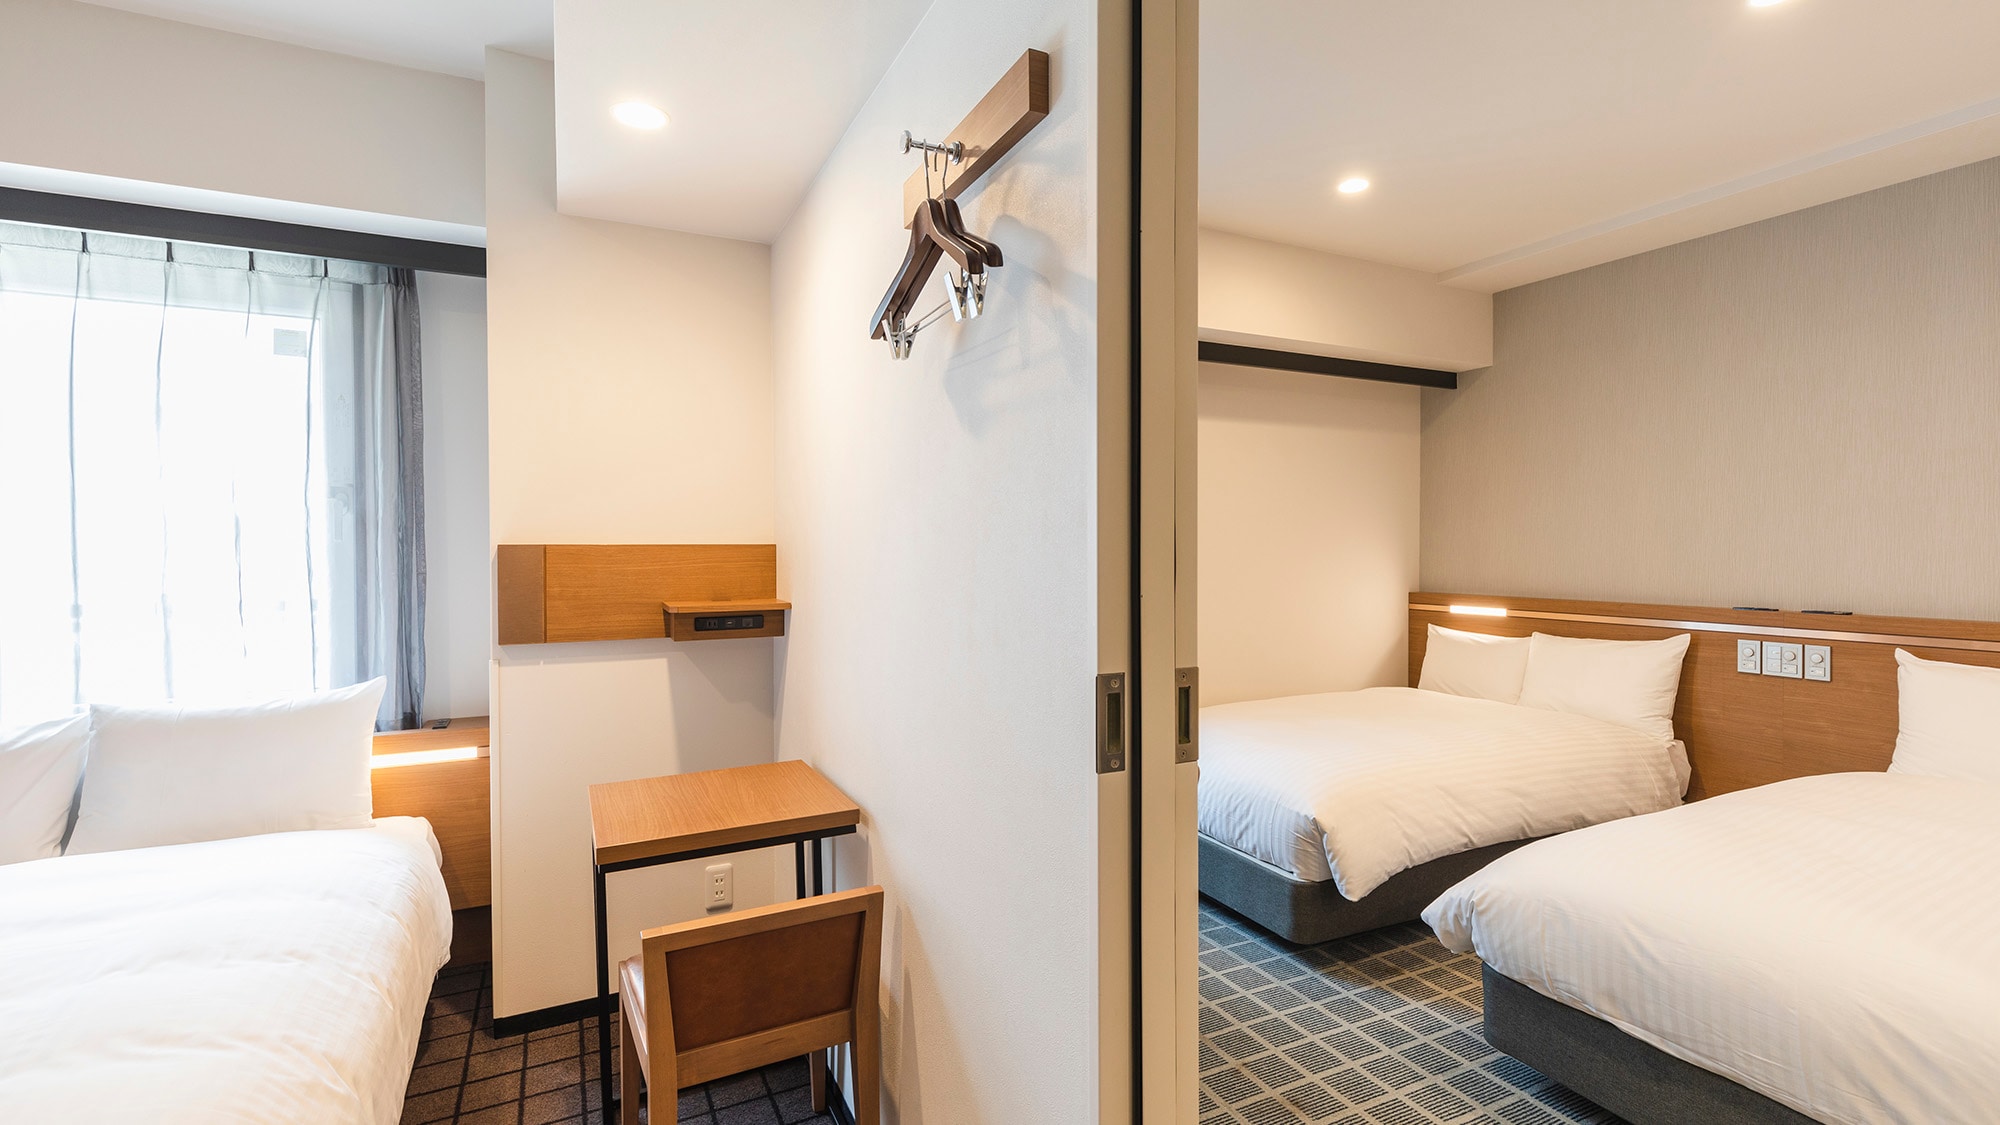 ・[Connecting room] Single and twin rooms where you can come and go in the room. Accommodates up to 3 people